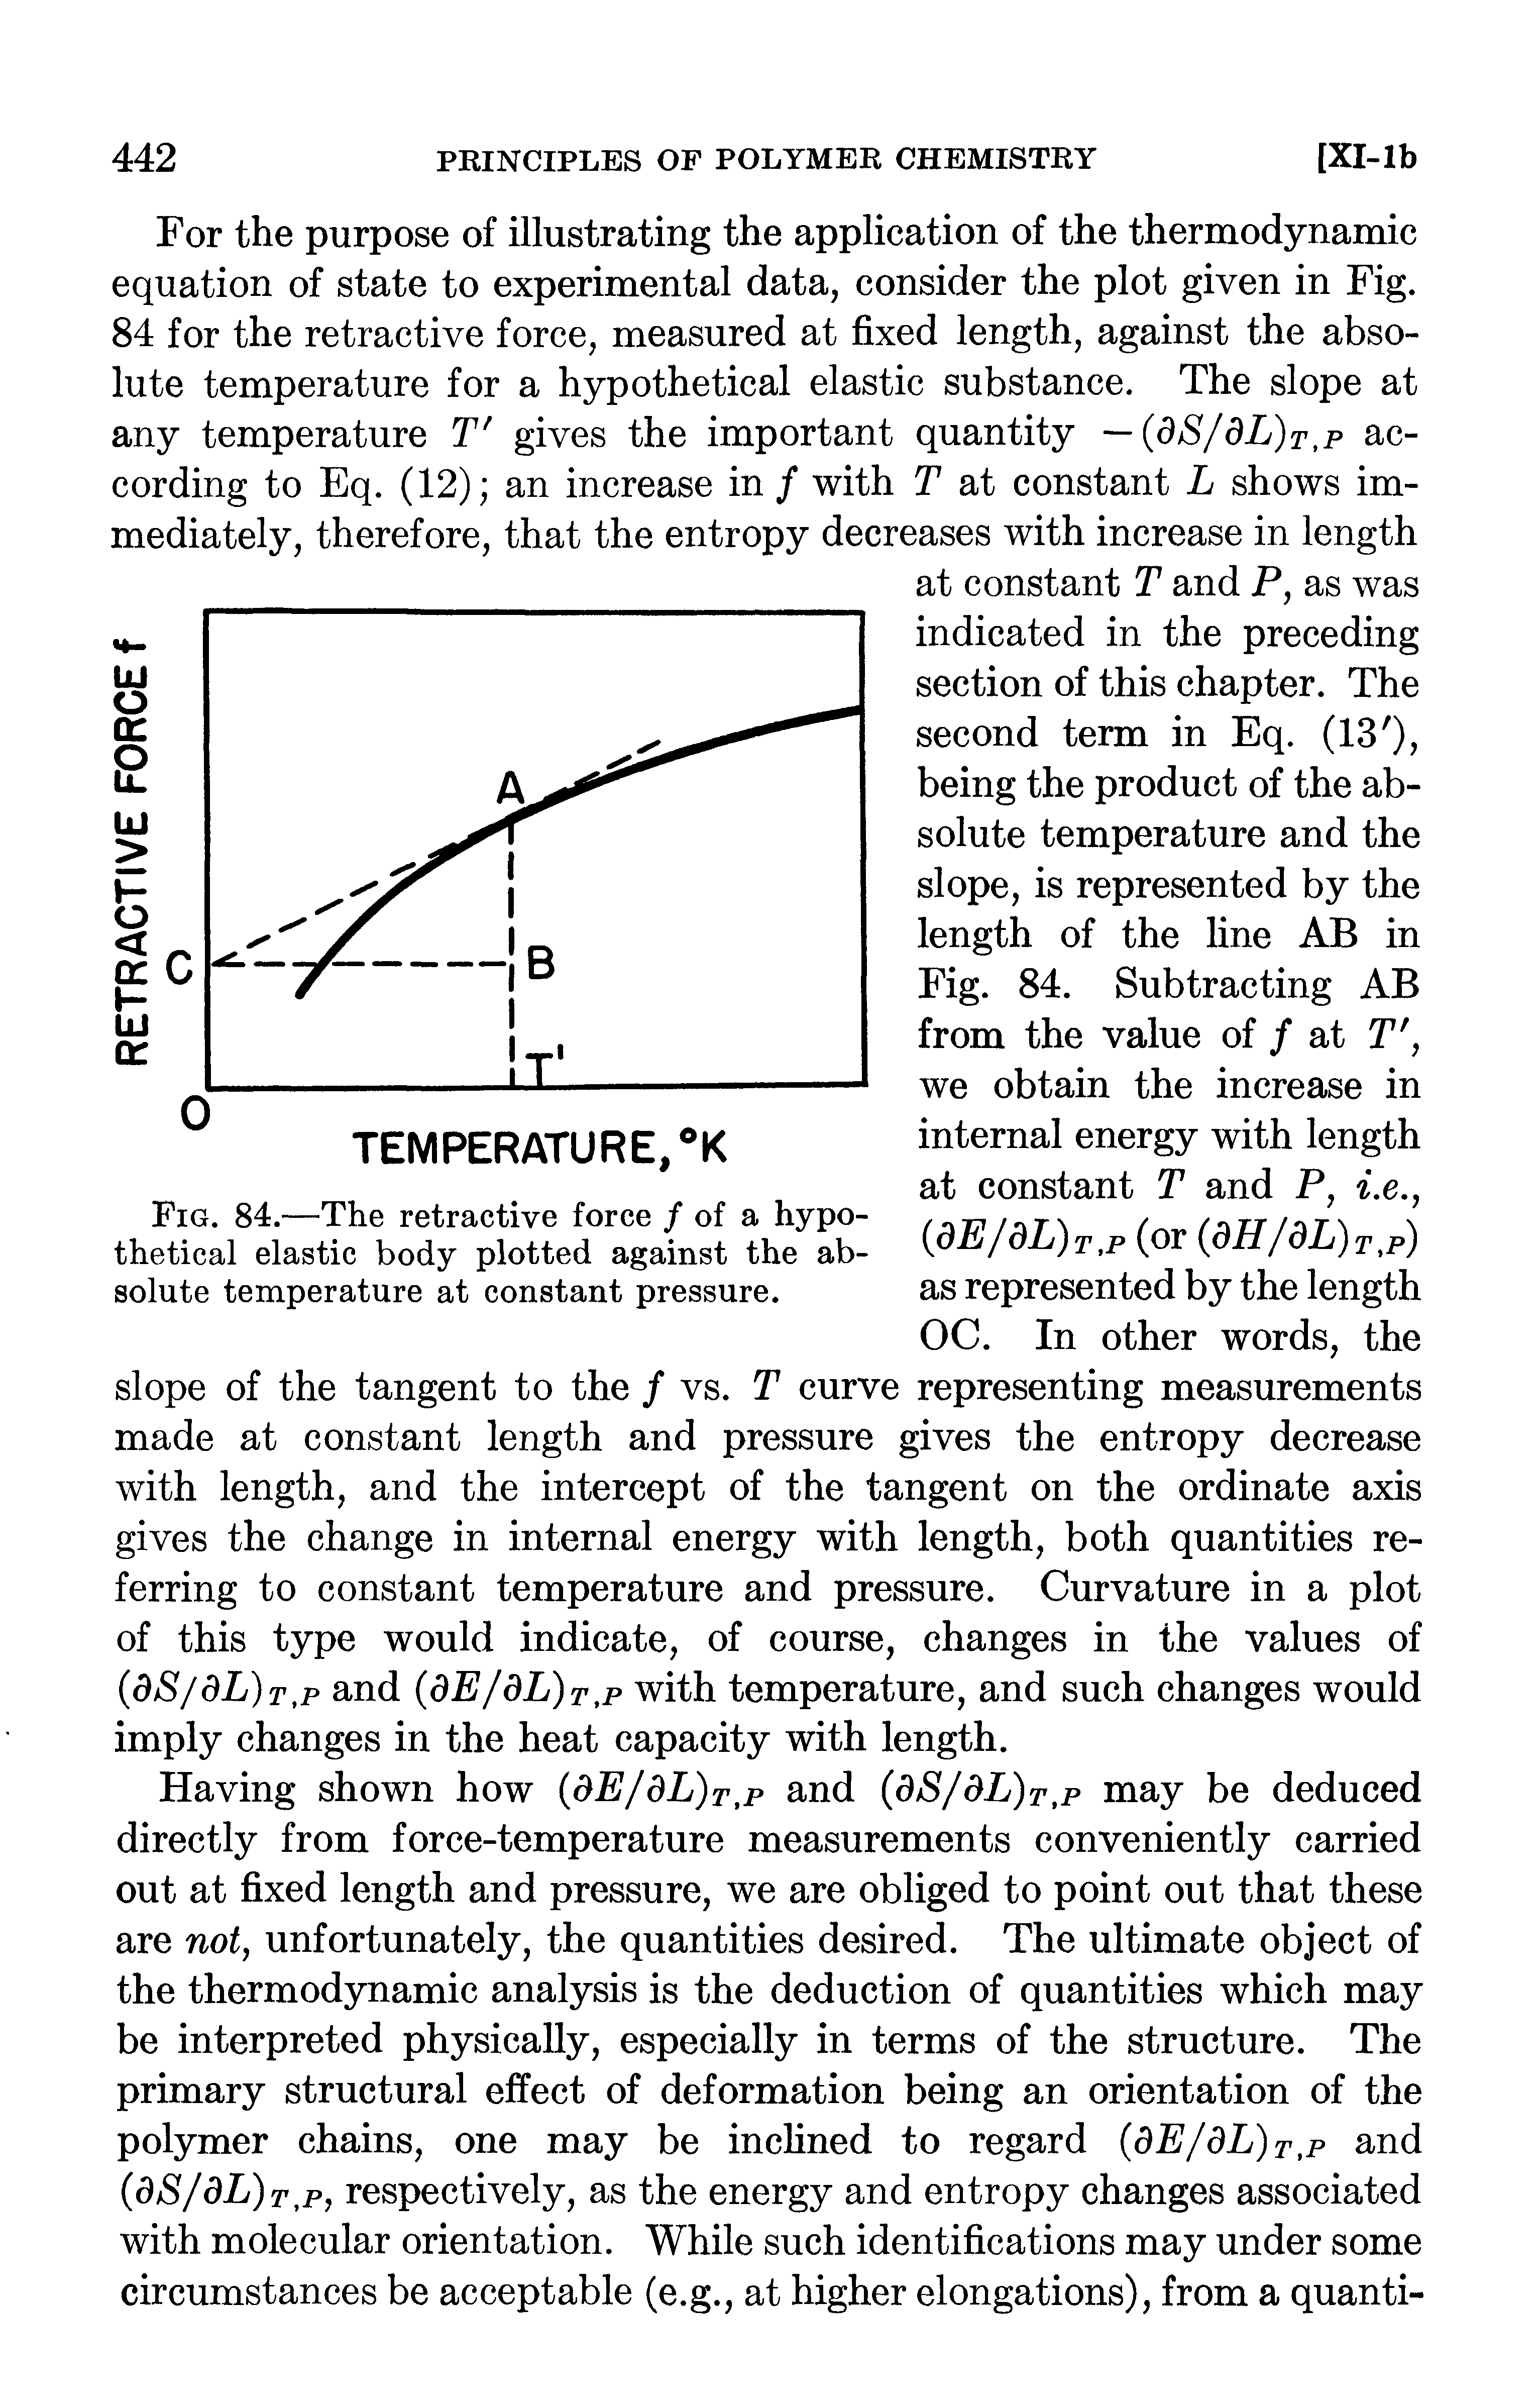 Fig. 84.—The retractive force / of a hypothetical elastic body plotted against the absolute temperature at constant pressure.